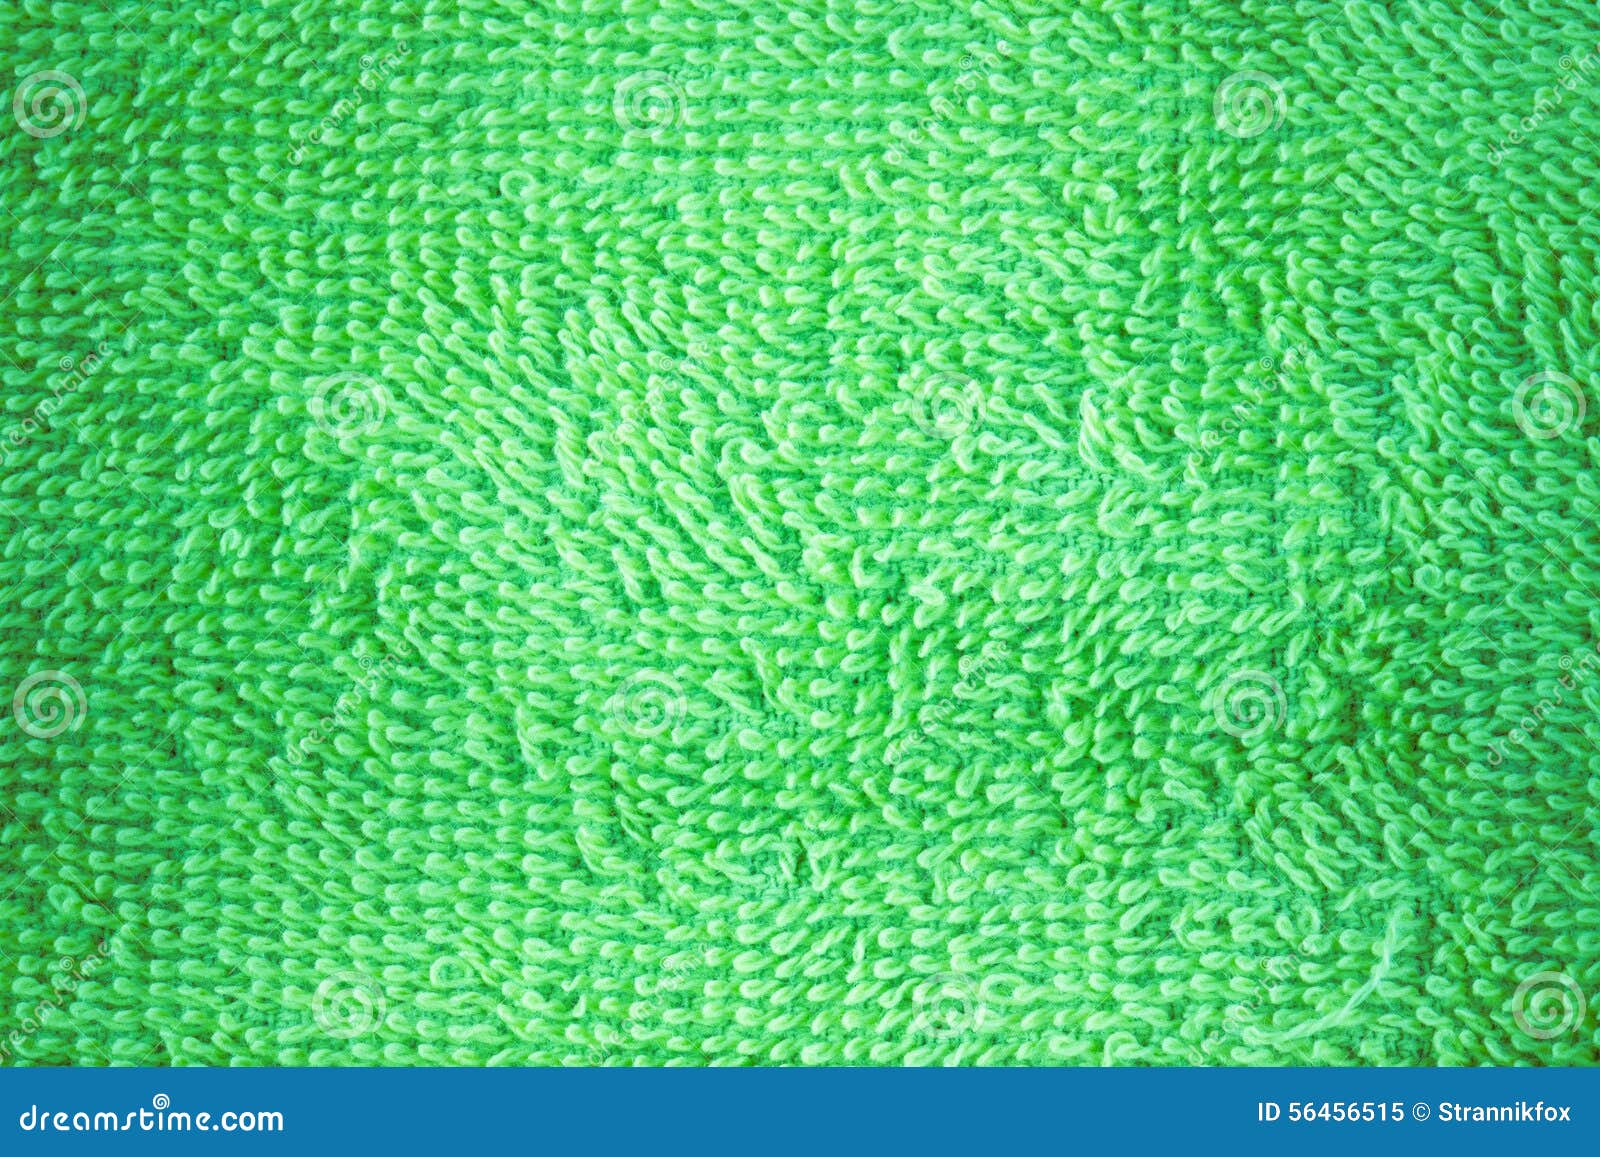 structure bright green towel for a background